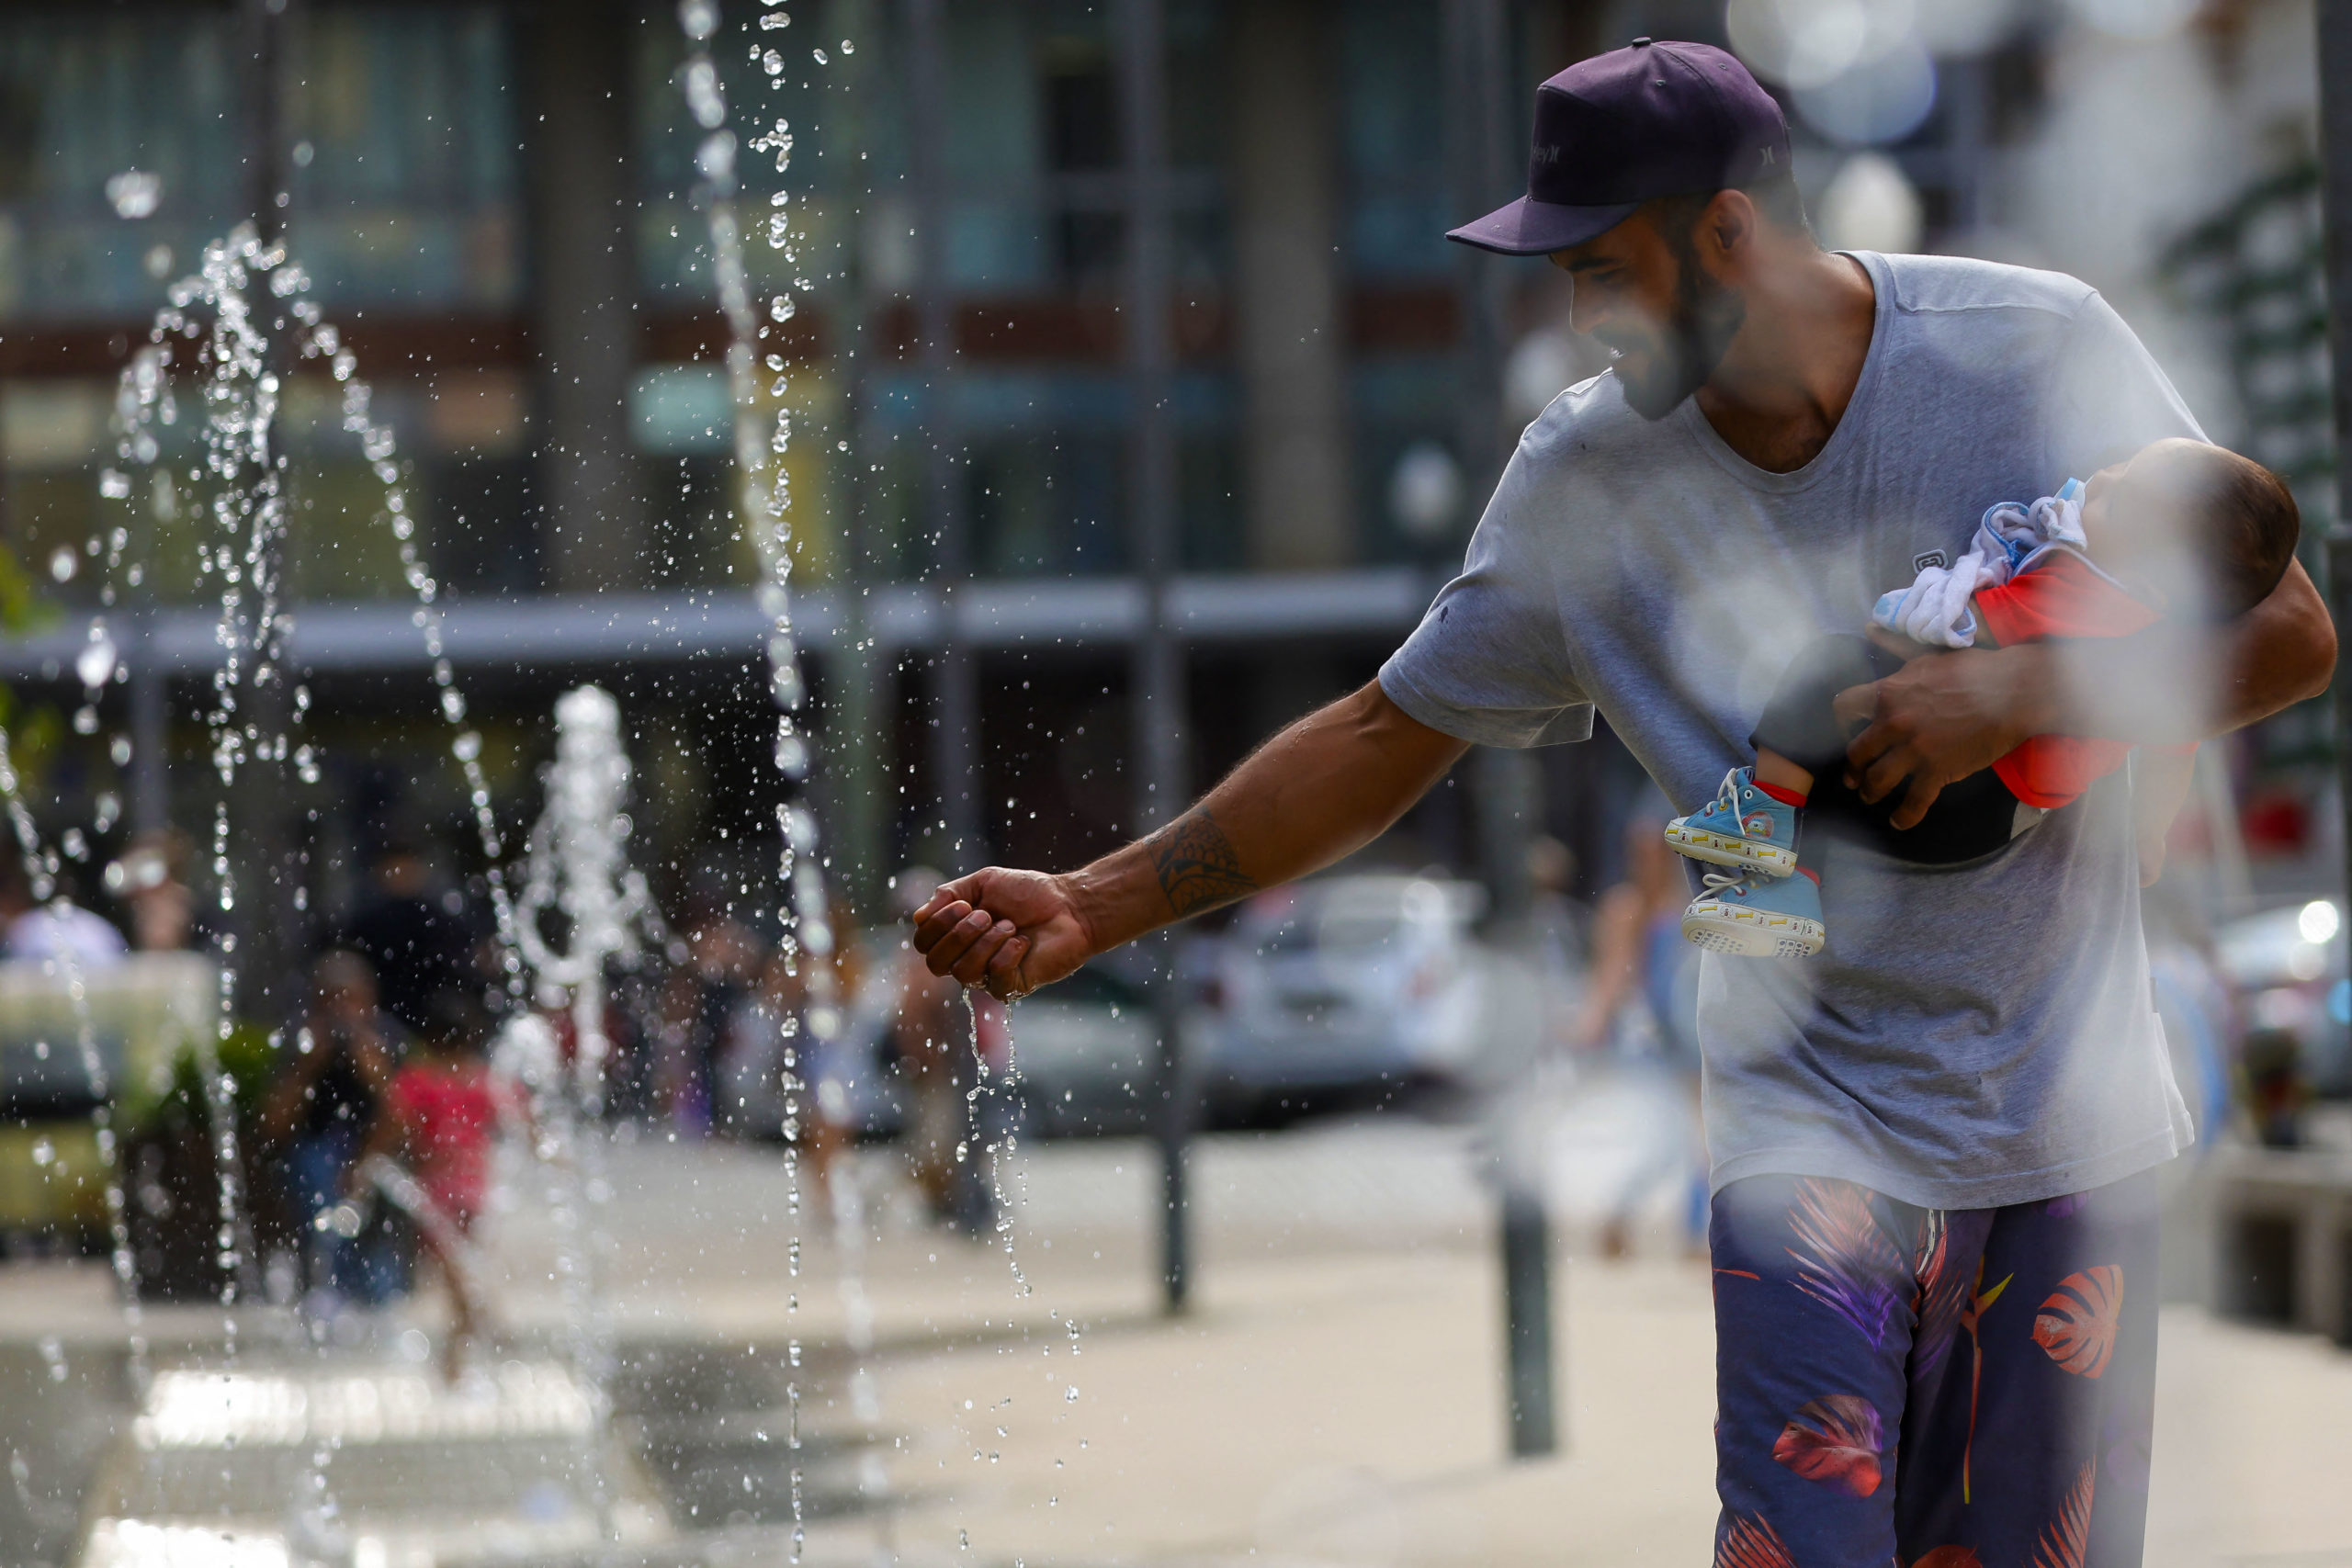 A man refreshes himself on a fountain in downtown Porto Alegre, Brazil on December 15, 2023. - A heatwave has hit Rio Grande do Sul, and the temperature could reach 43 ºC. This wave, which began on December 14, is expected to last until at least Sunday, close to the arrival of summer, which is on December 22. The National Institute of Meteorology has issued an orange heatwave alert covering the entire state, which is also a warning of the health risks posed by extreme temperatures. (Photo by SILVIO AVILA / AFP)